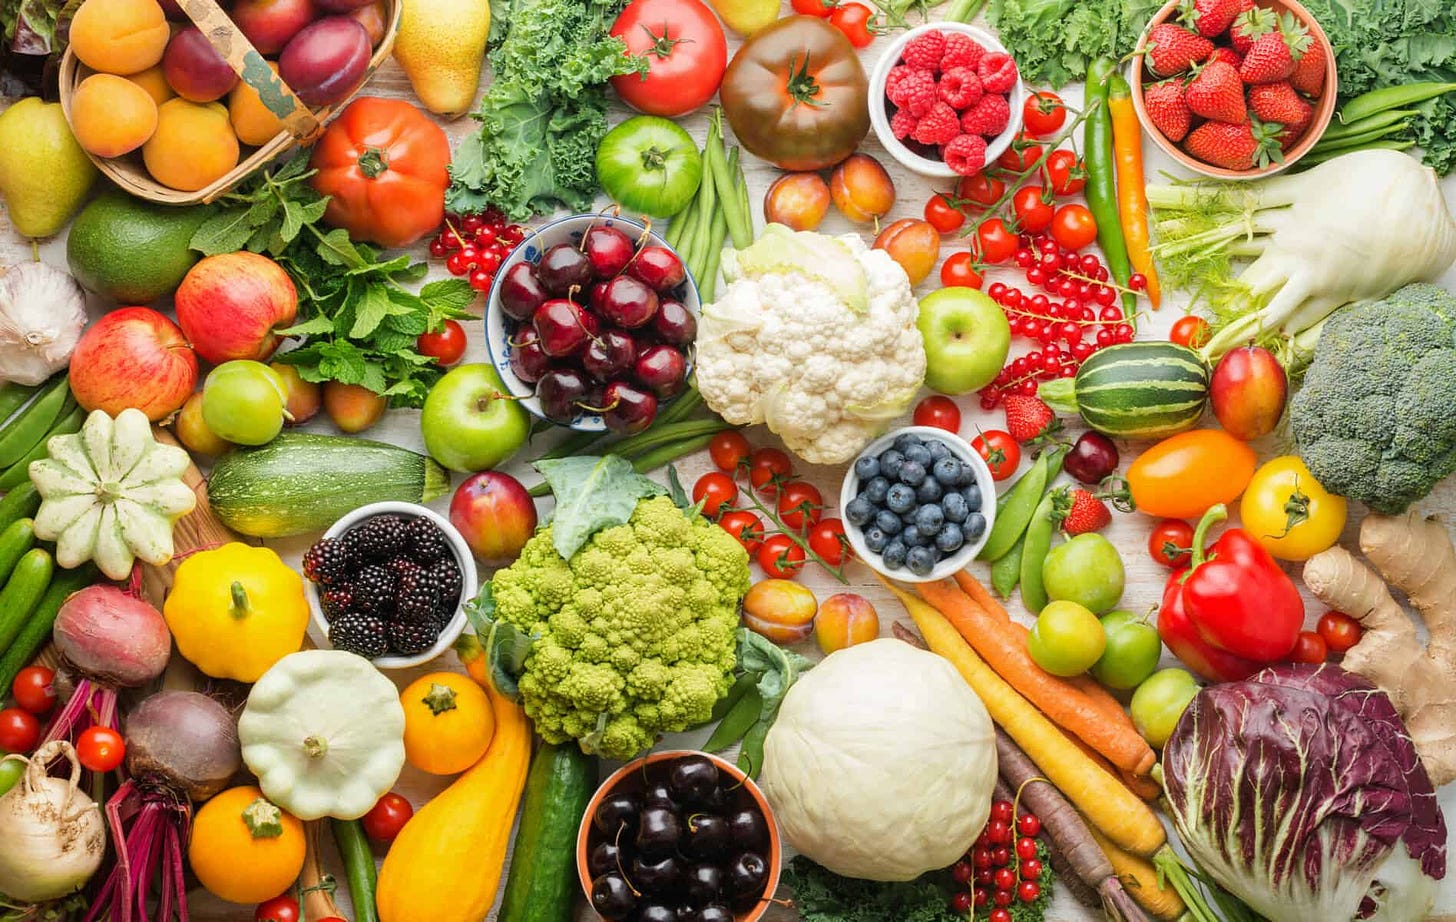 New German Dietary Guidelines Recommend Eating at Least 75% Plant-Based Foods - vegconomist - the vegan